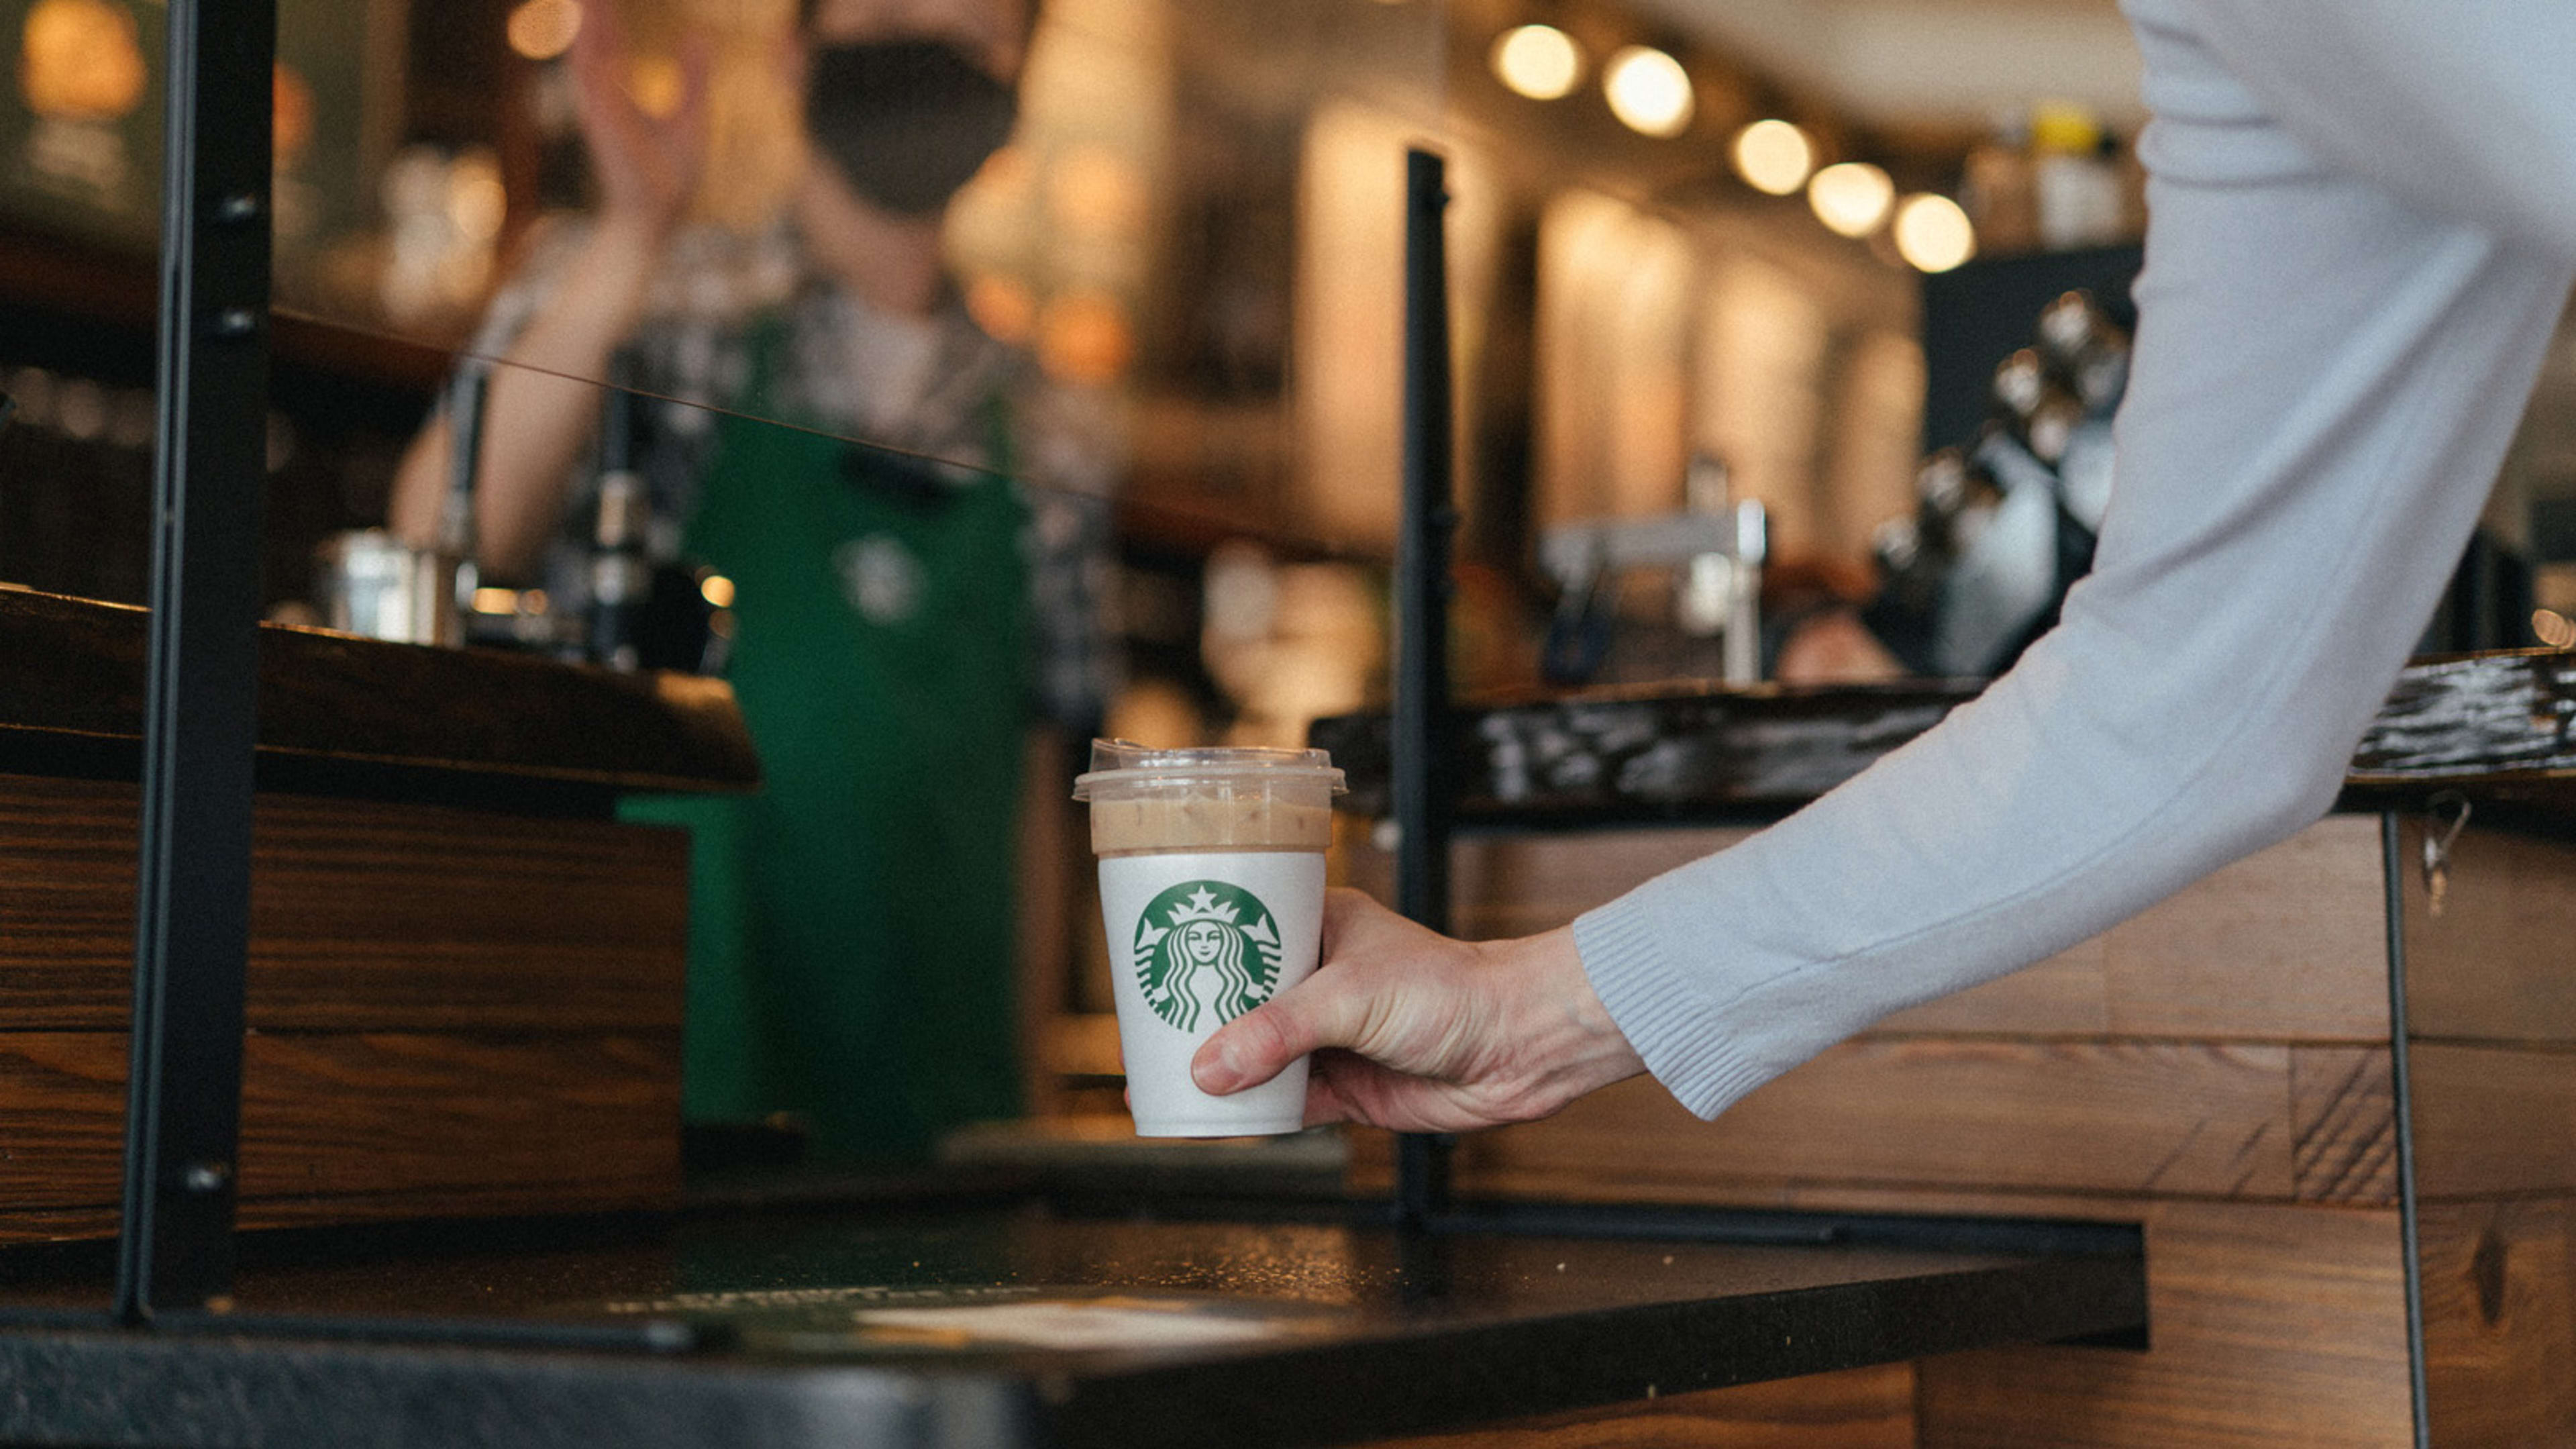 Starbucks is starting to work toward ditching disposable coffee cups